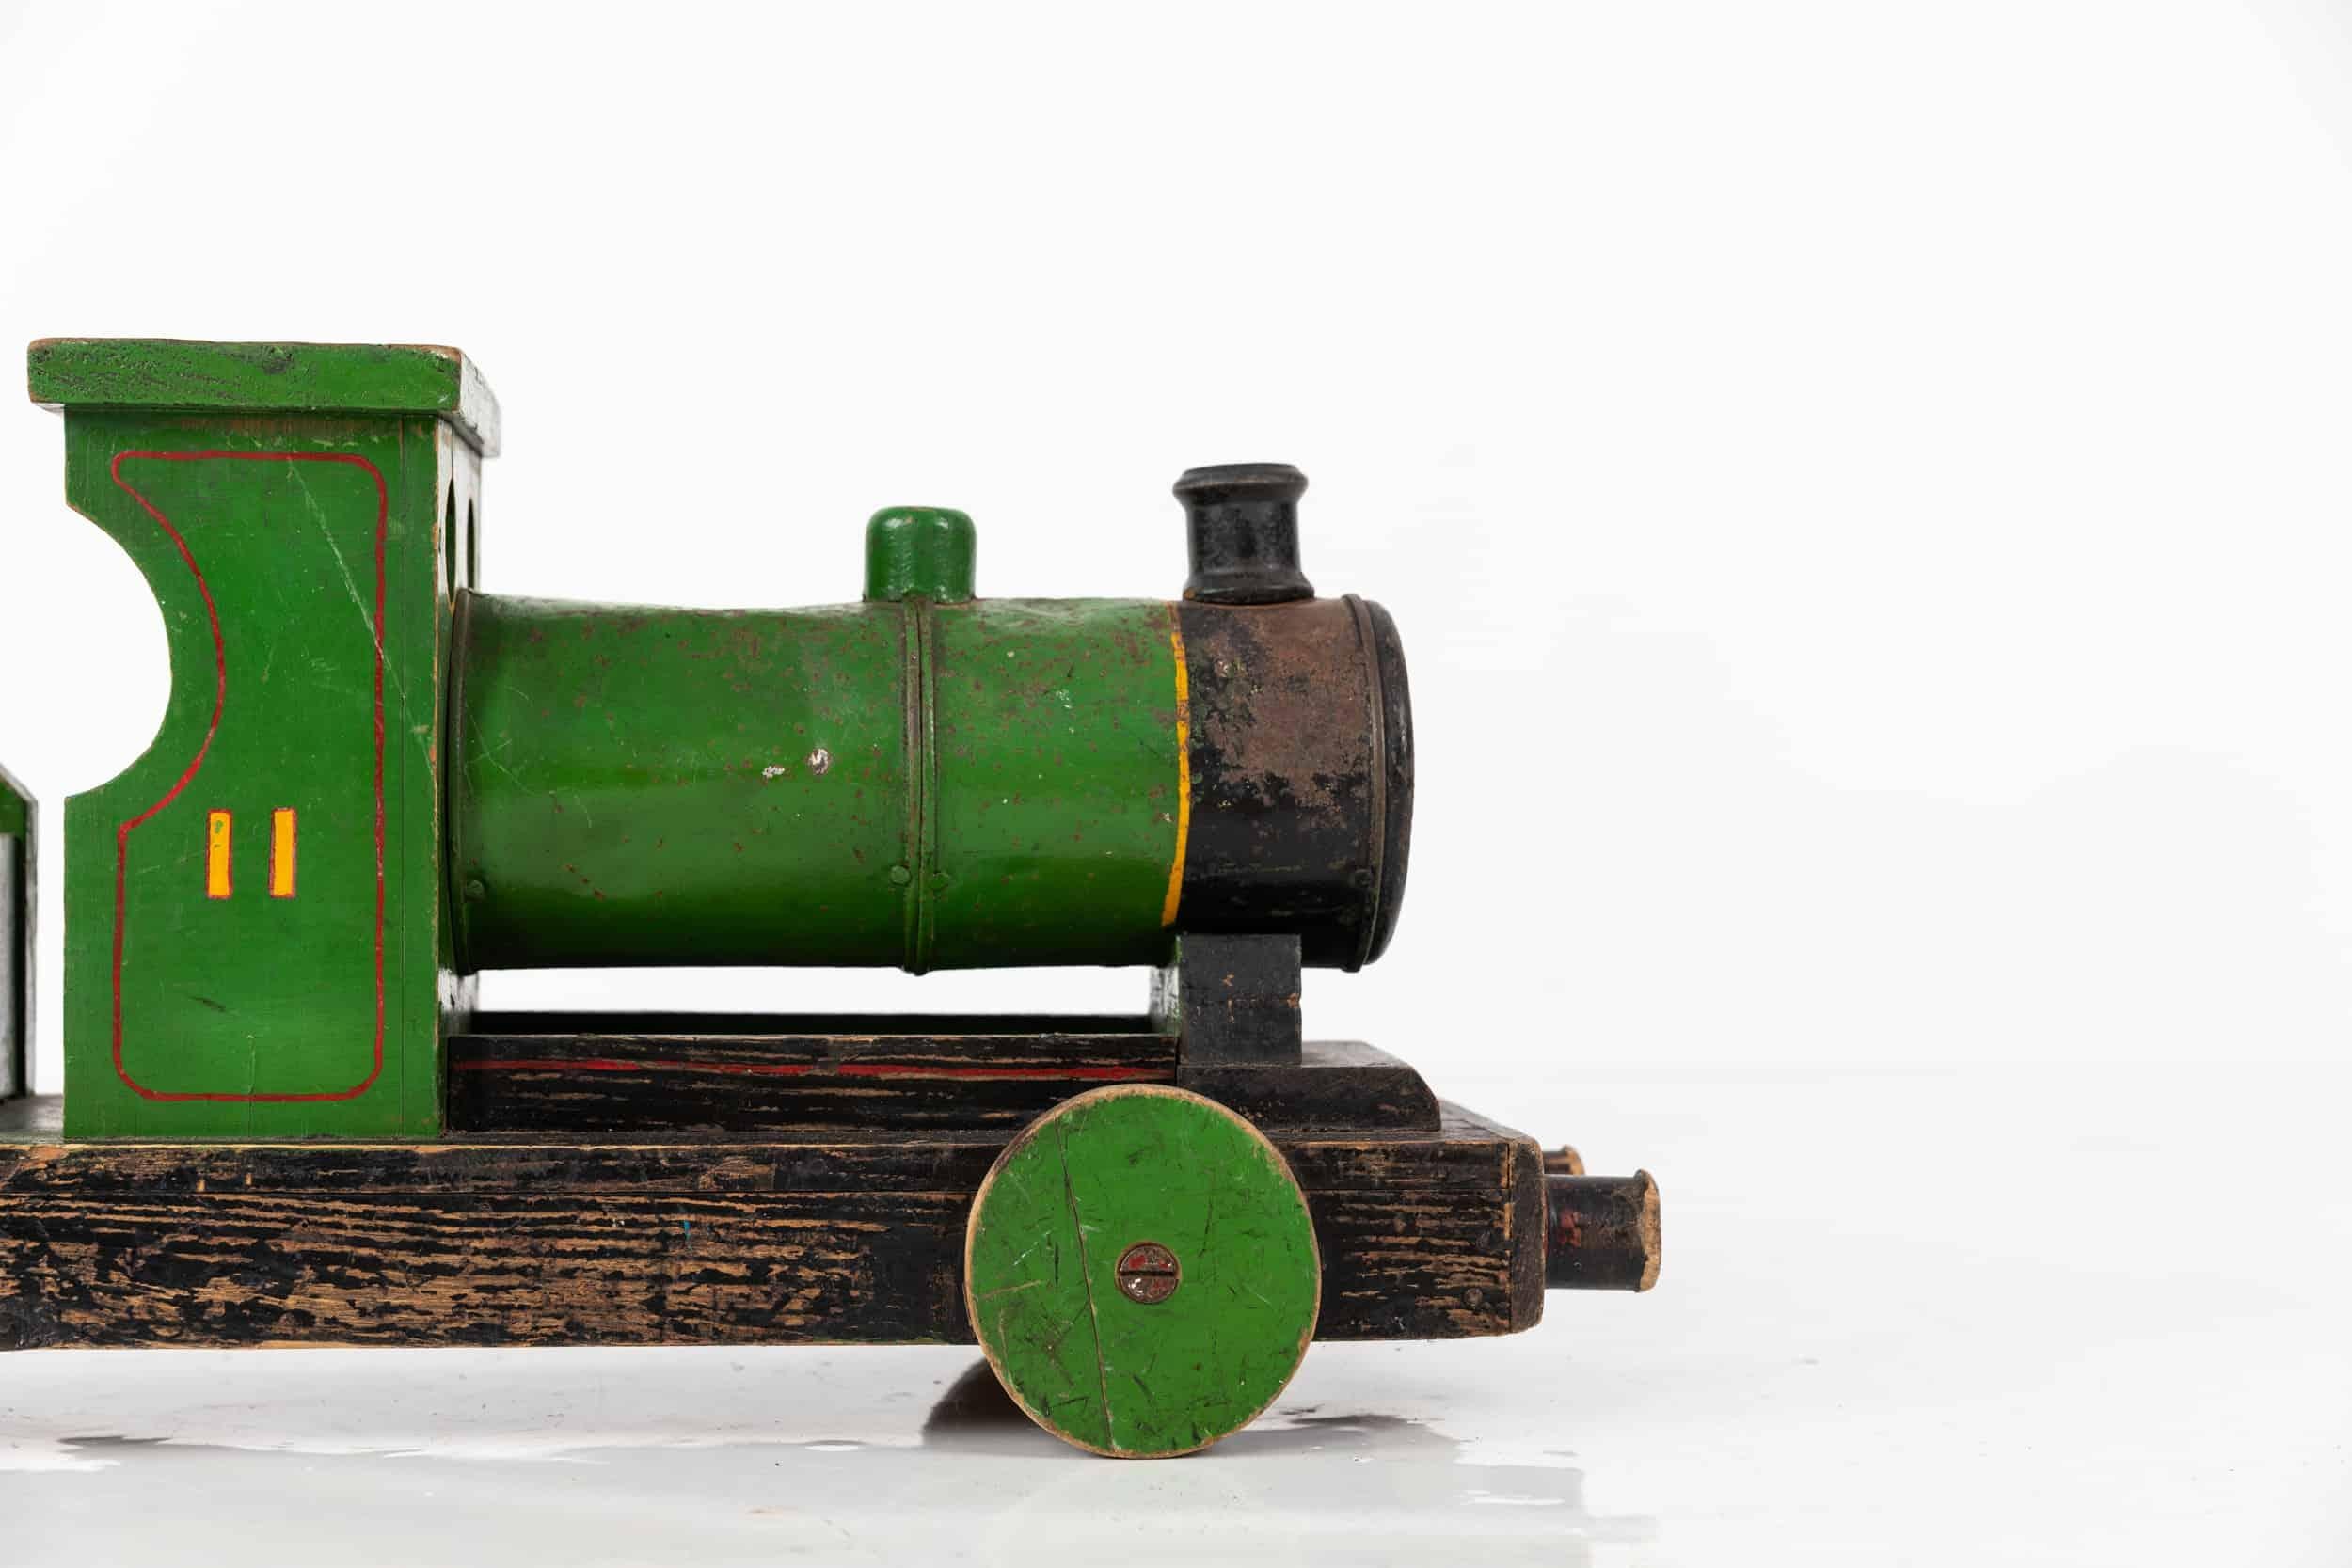 vintage wood toy trains for sale